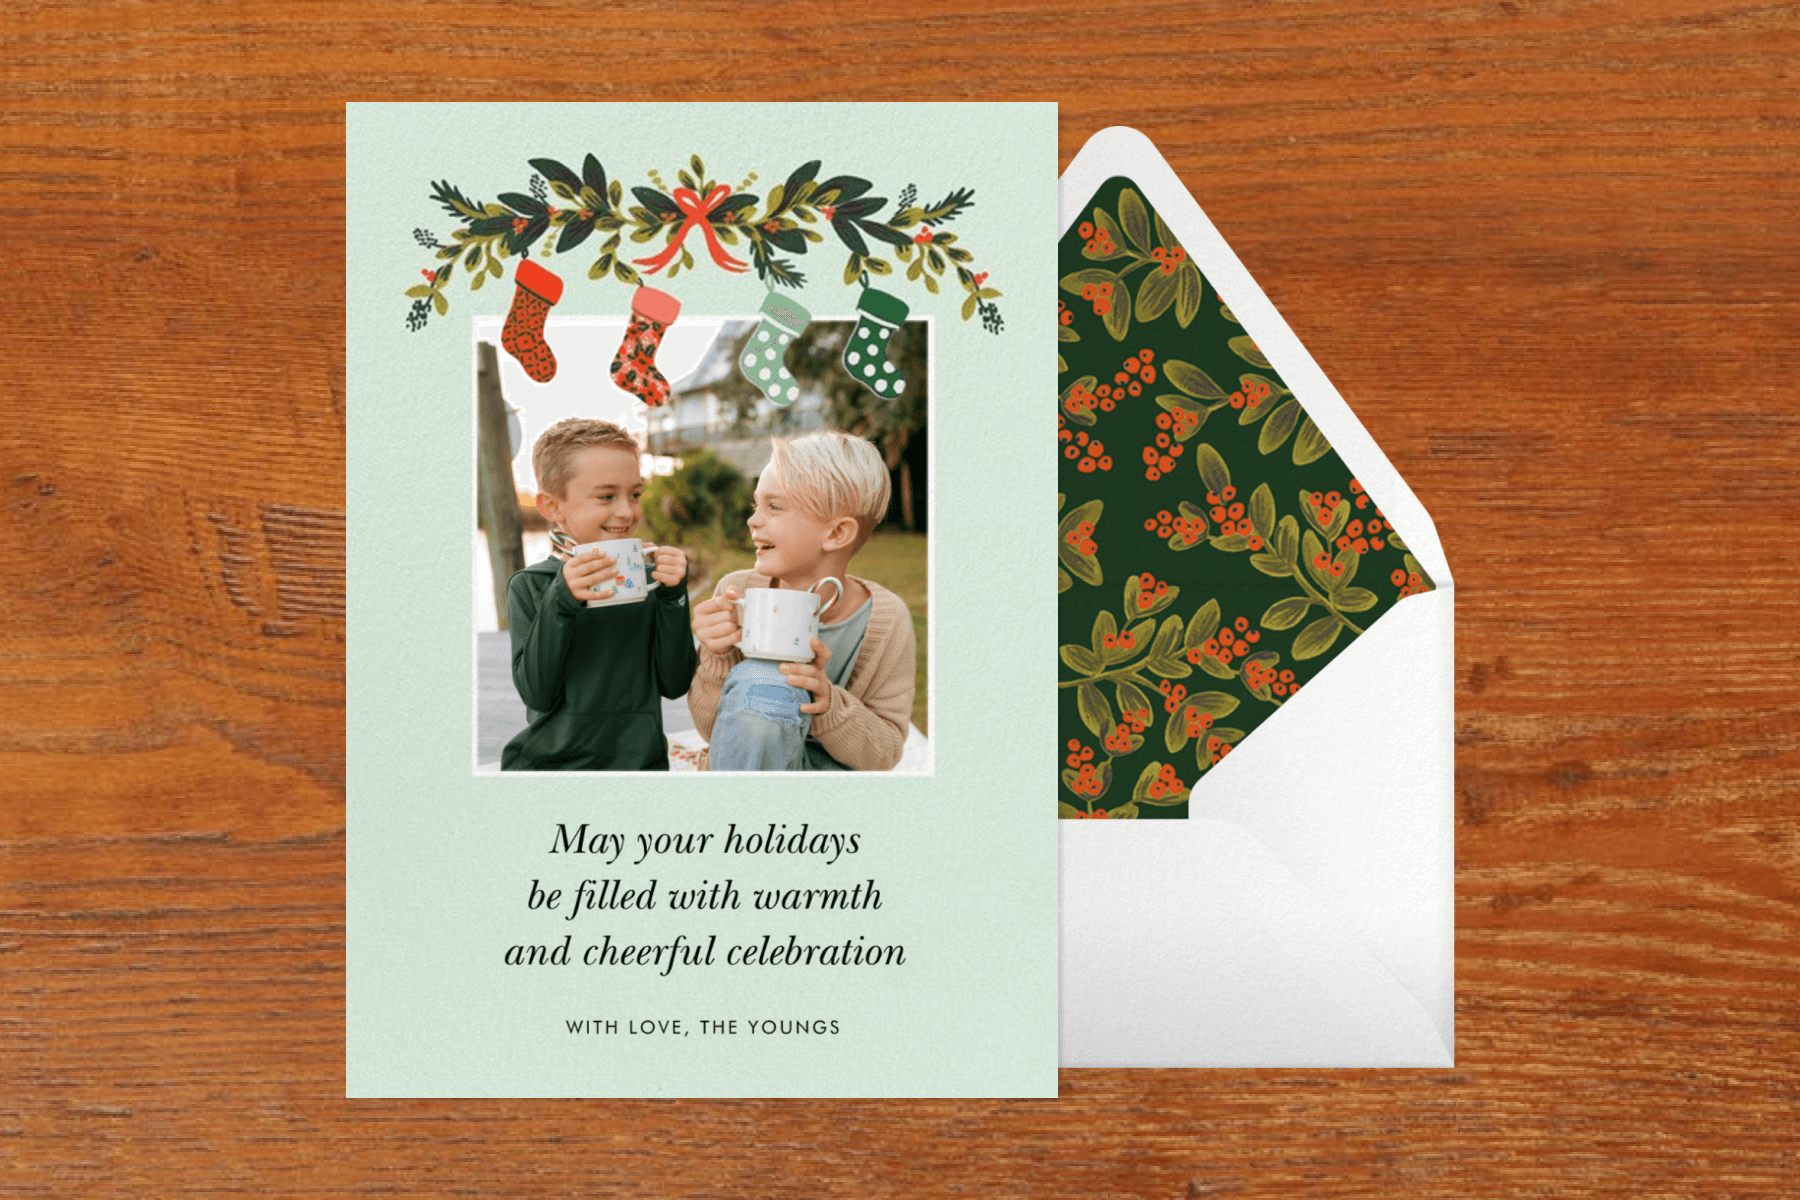 A mint-colored photo holiday card with an illustration of stockings on a garland, featuring a photo of two boys drinking hot cocoa.